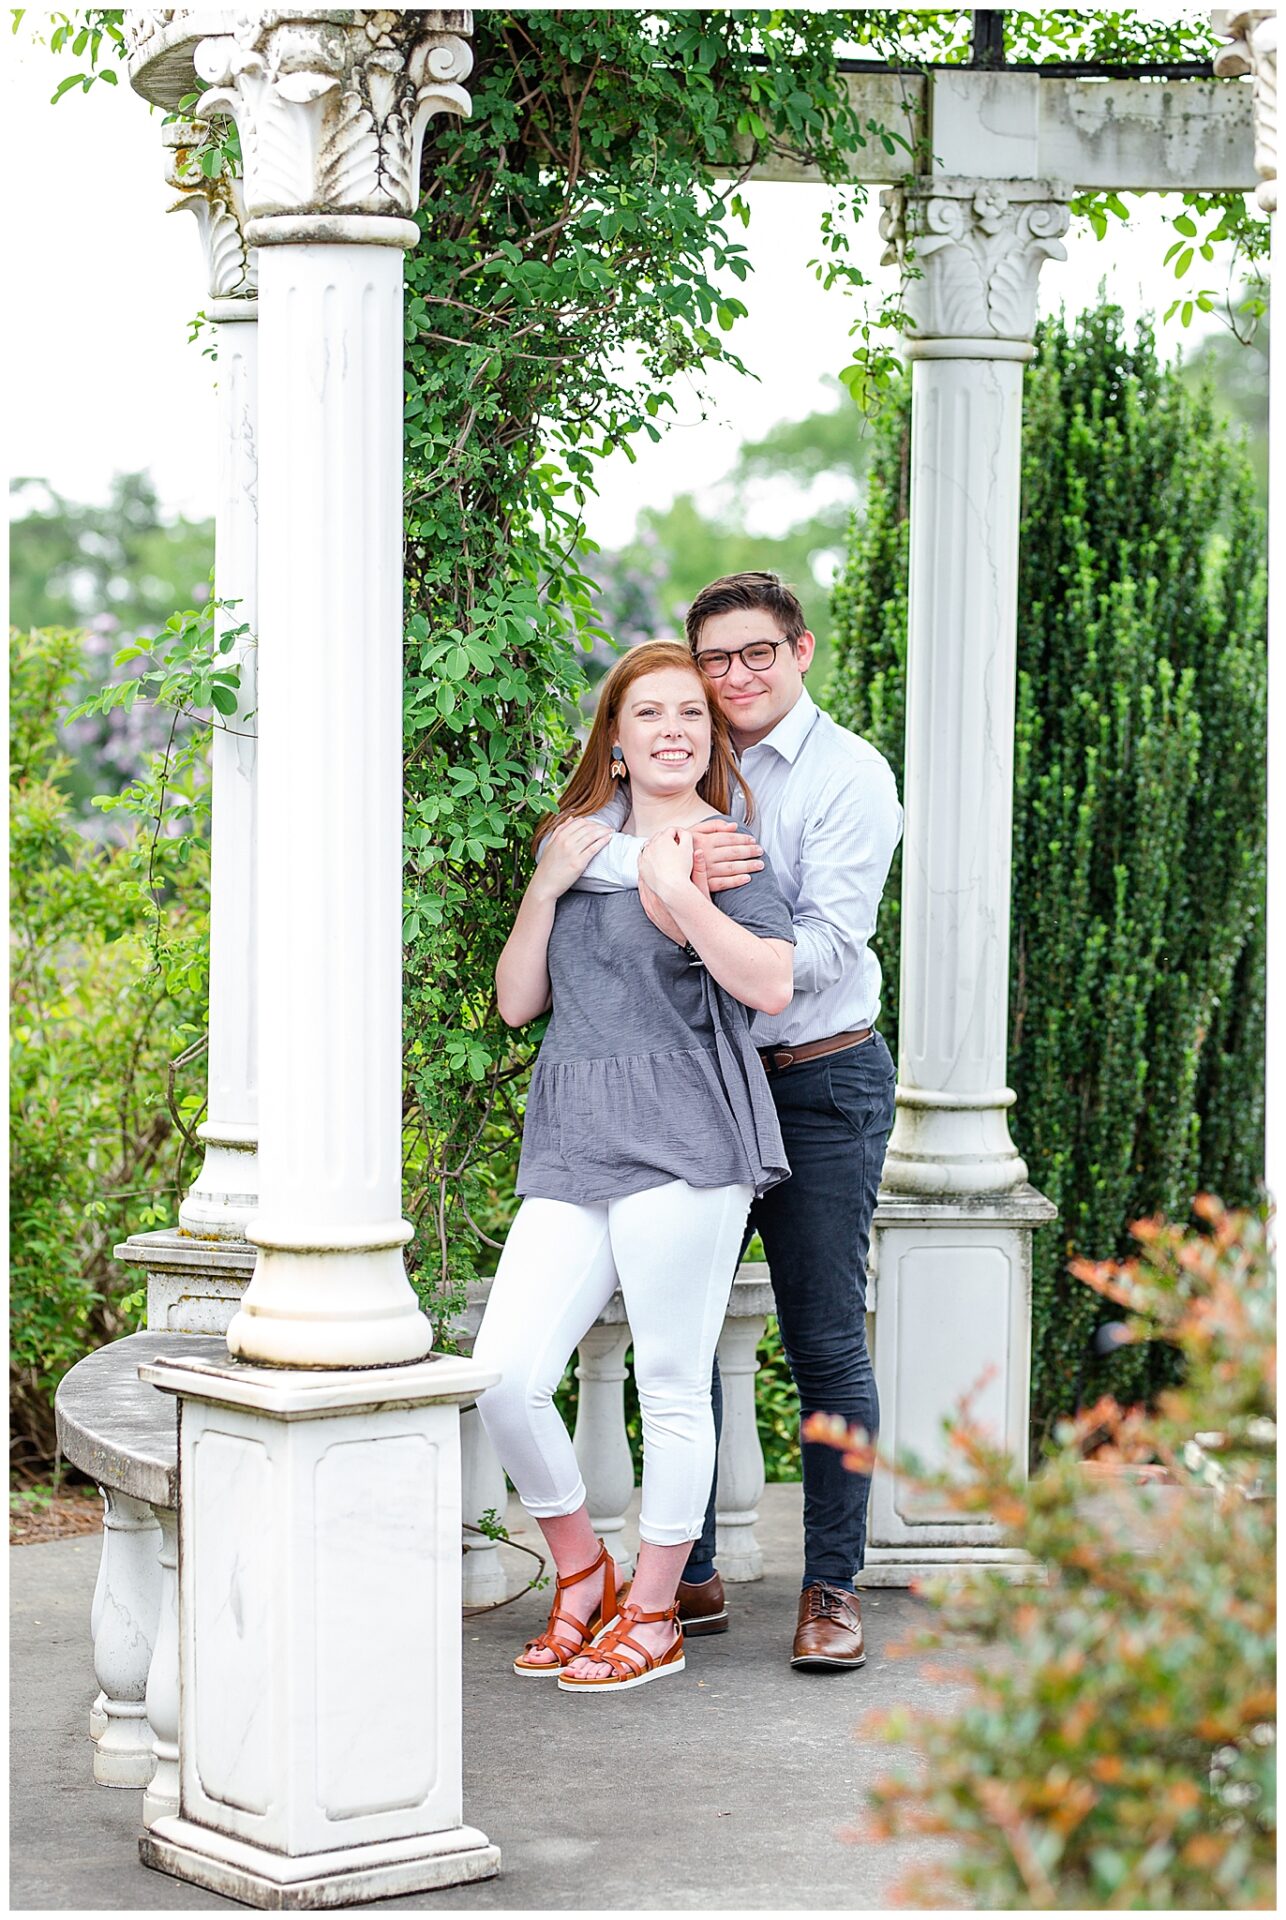 Moore's Springs Manor Engagement Session